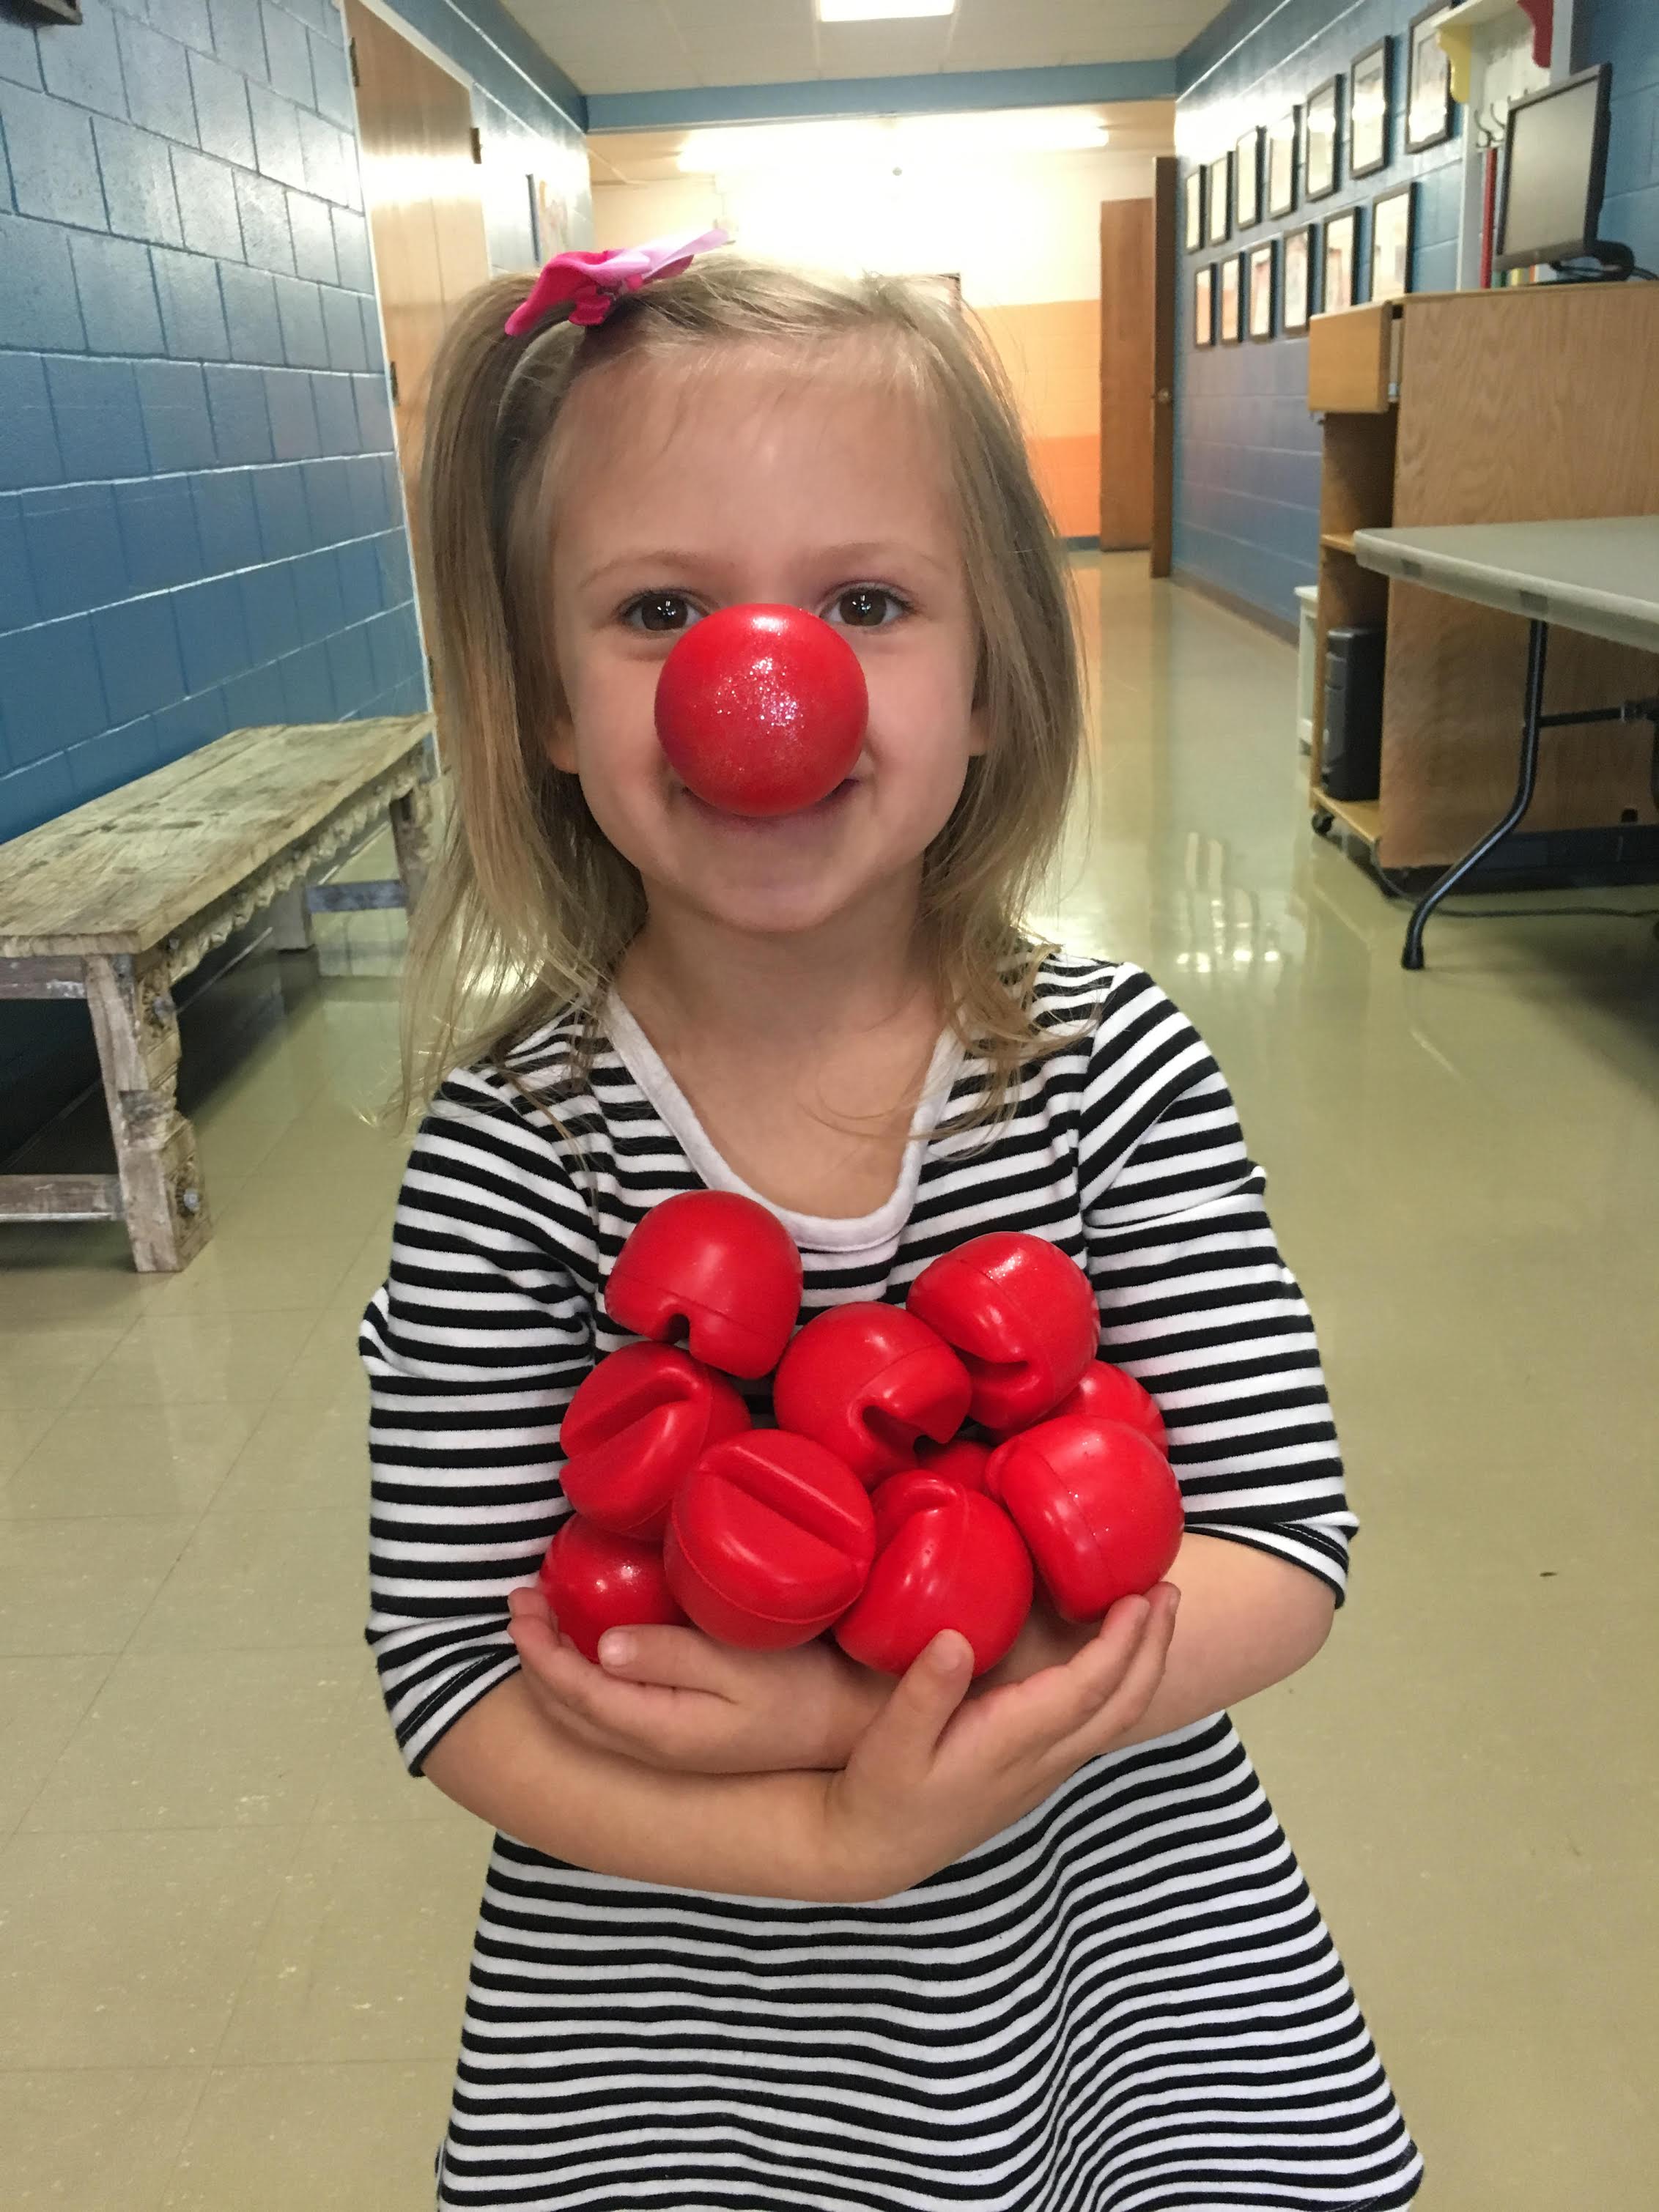 Bring Red Noses for your whole class.